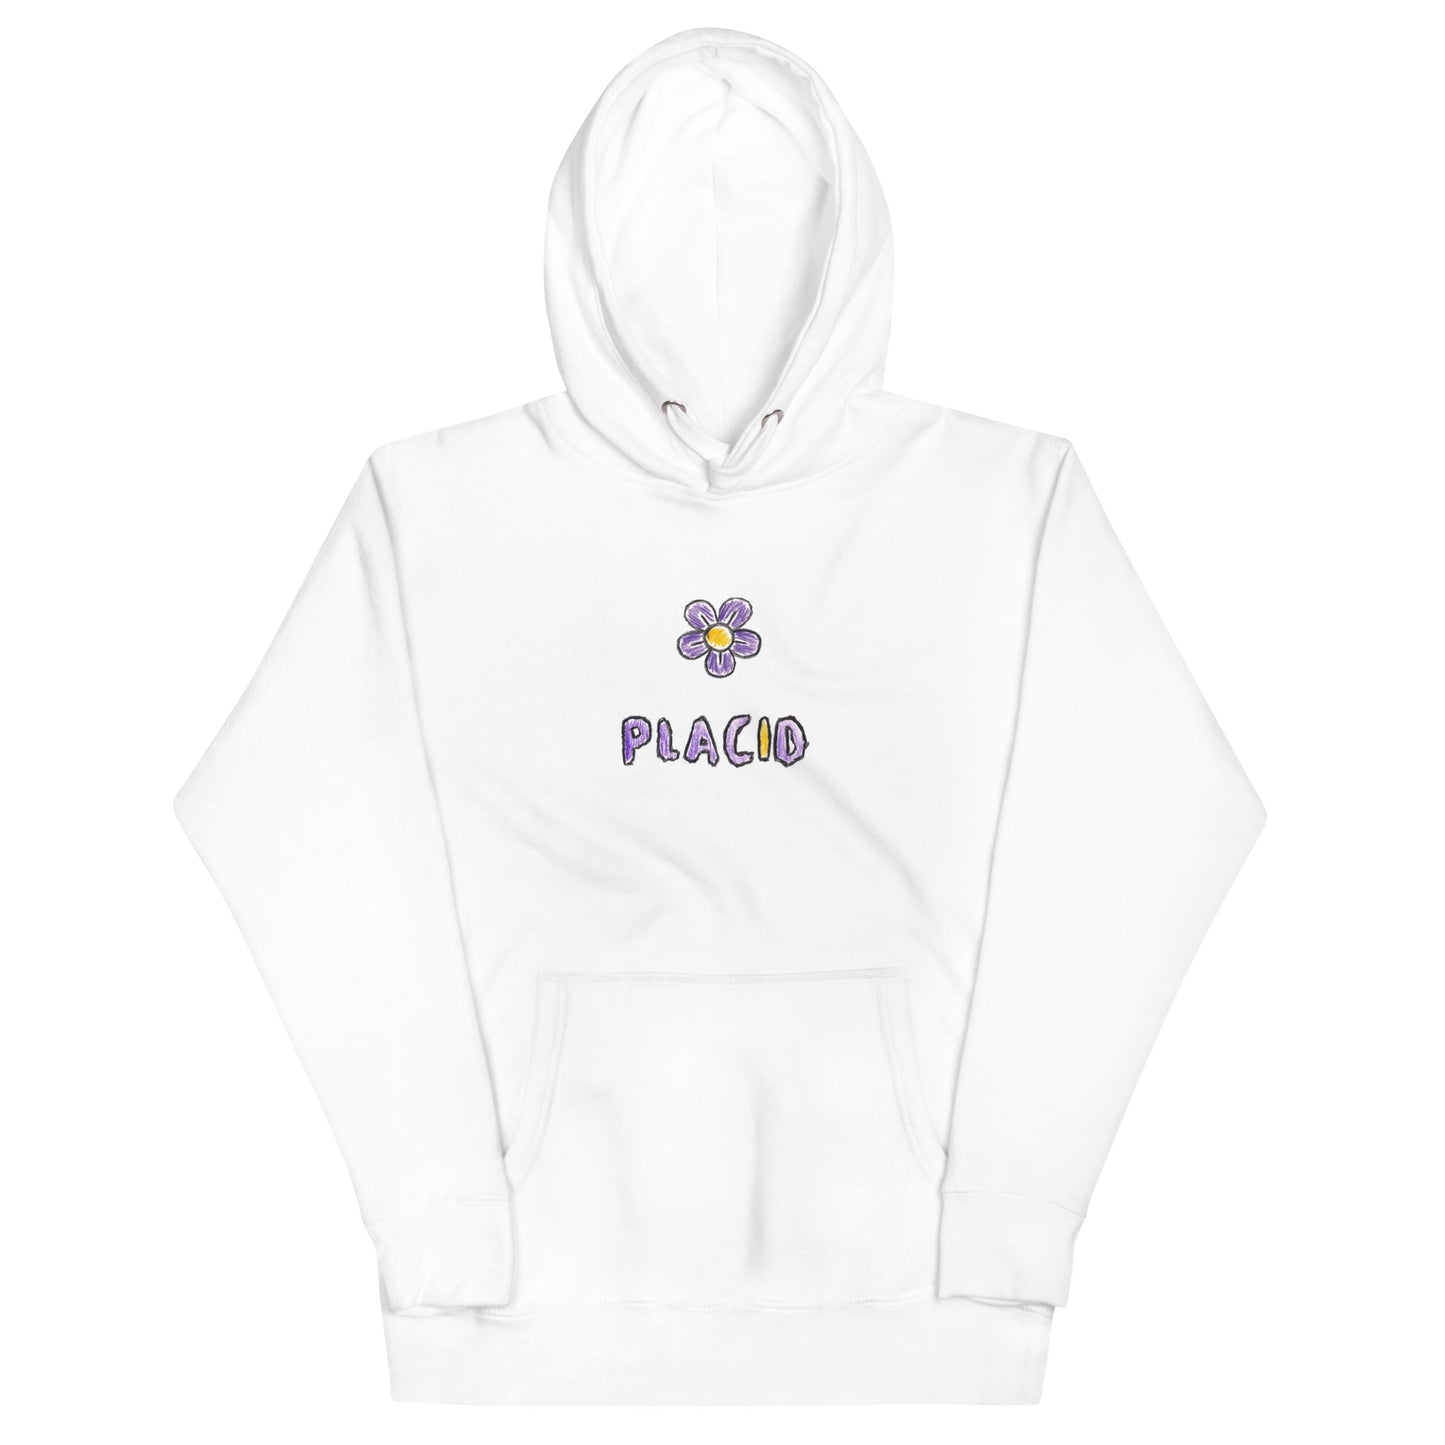 placid with flower on white hoodie